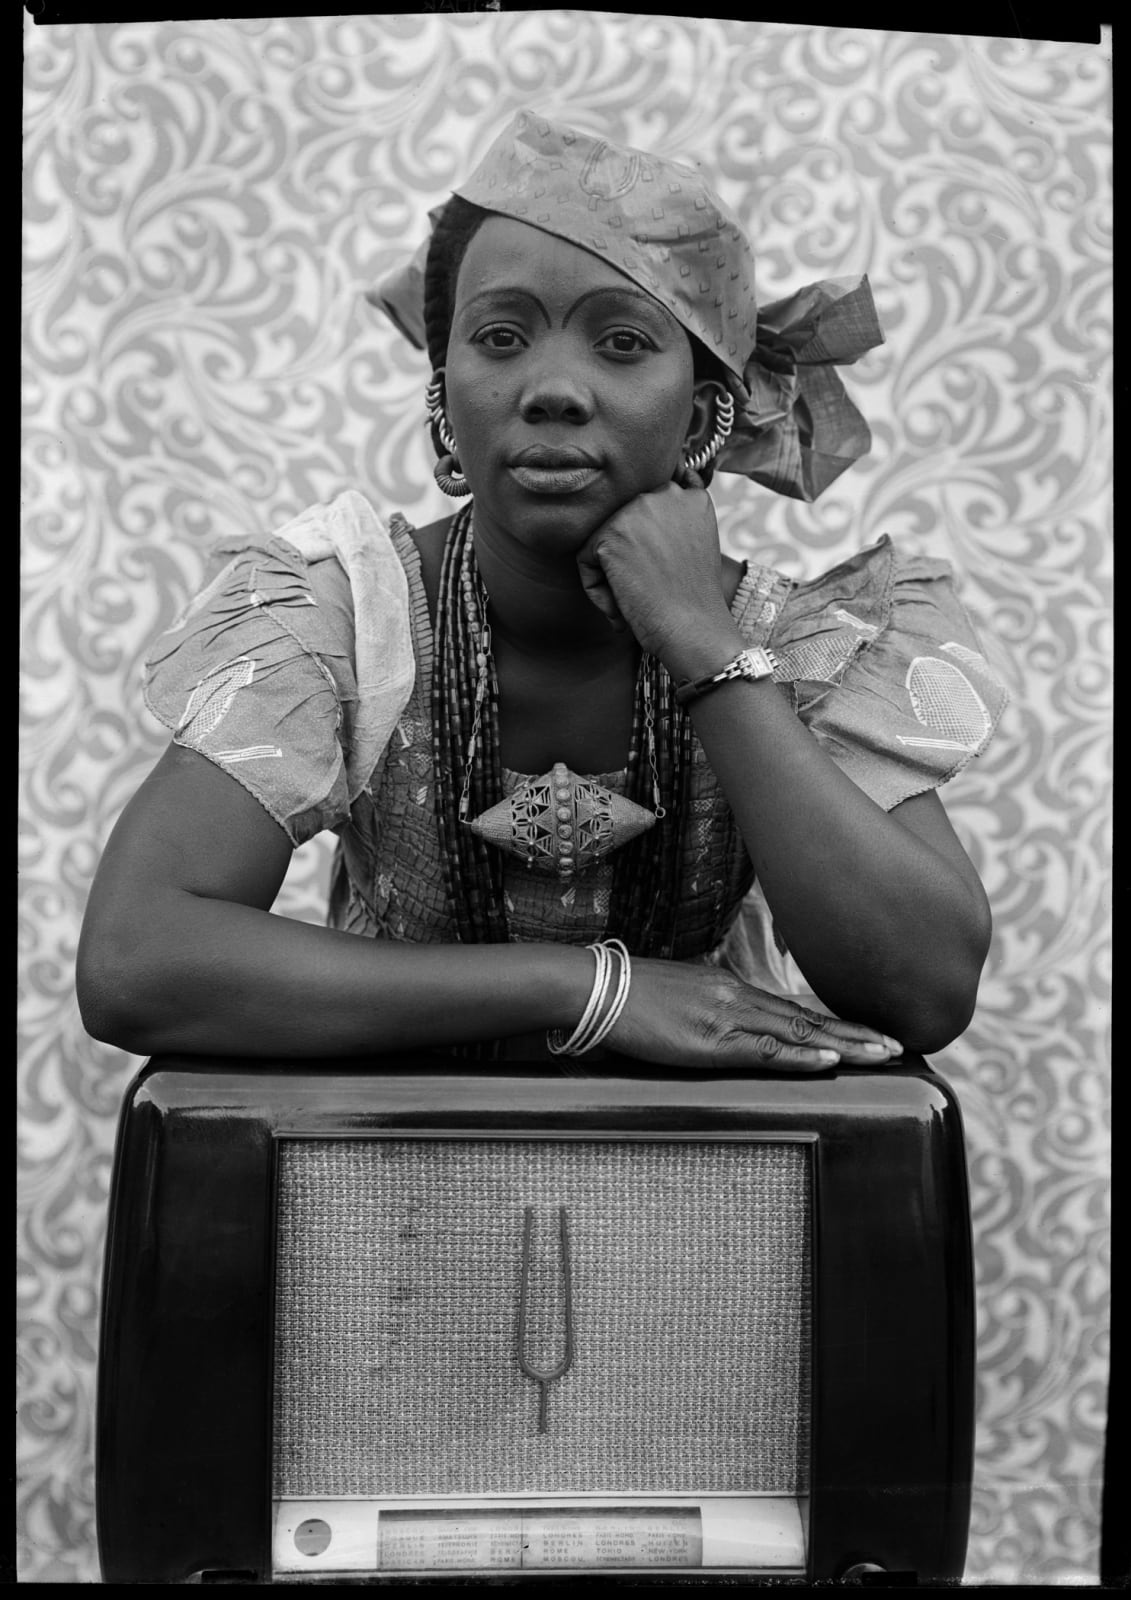 Seydou Keïta Sans titre/ Untitled (00107-MA.KE.046), 1956-1957 Posthumous Gelatin black and white silver print on cartoline paper 280g 60 x 50 cm (23 5/8 x 19 5/8 in.) Edition of 10 + 2 AP Posthumous Gelatin black and white silver print on cartoline paper 280g back-mounted on Aluminium 1mm 162 x 122 cm (63 25/32 x 48 1/32 in) Edition of 5 + 2 AP